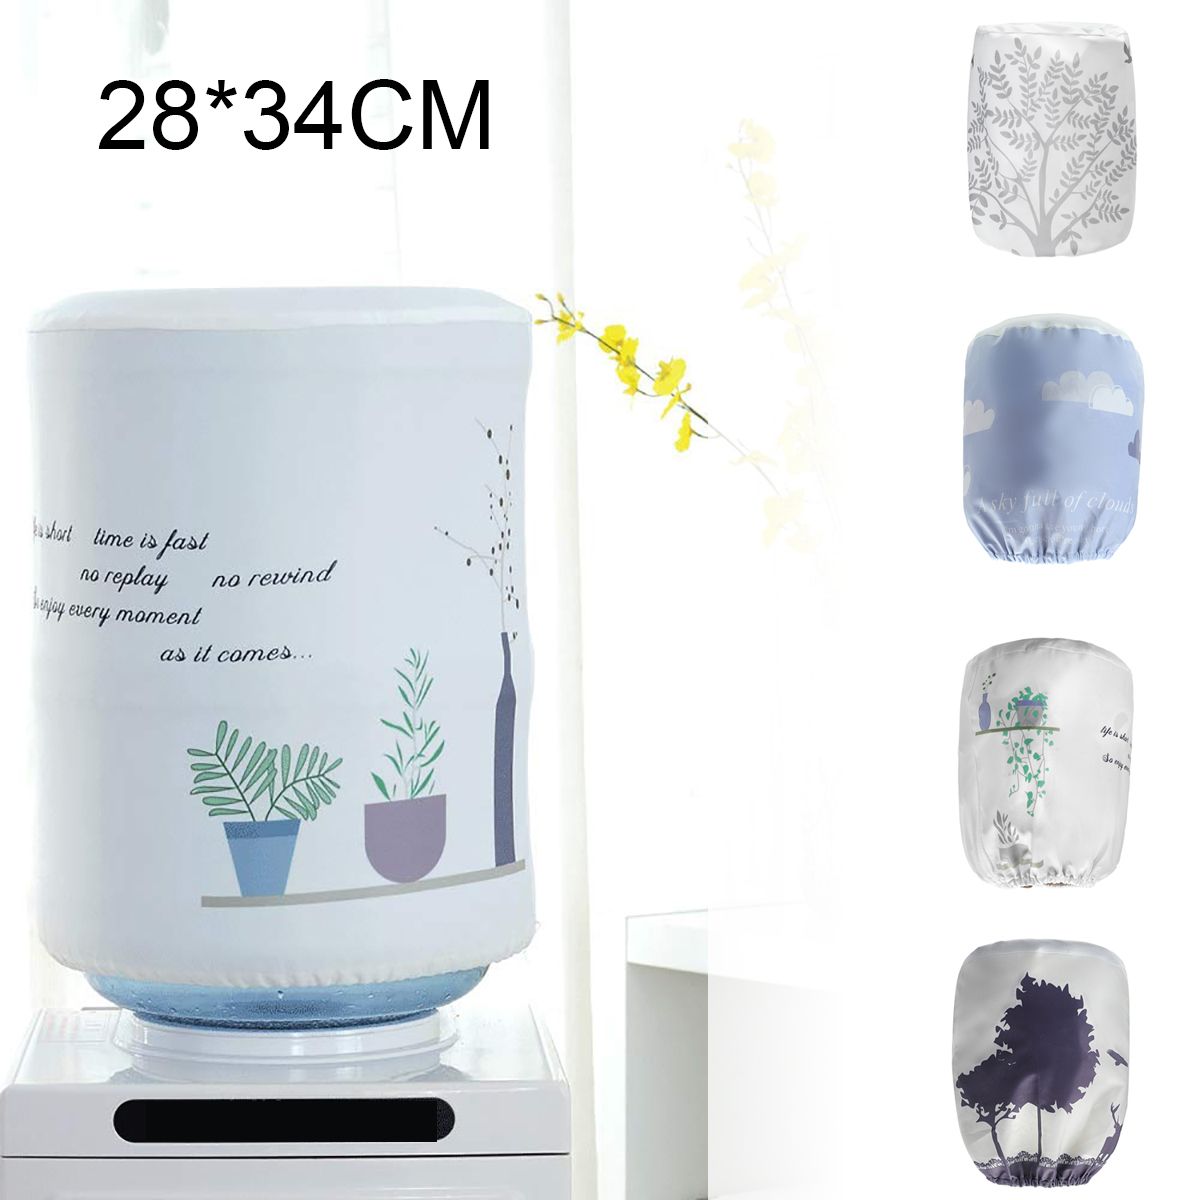 Water-Dispenser-Bucket-Cover-Barrel-Dustproof-Protect-Case-Home-Office-Decorations-1553282